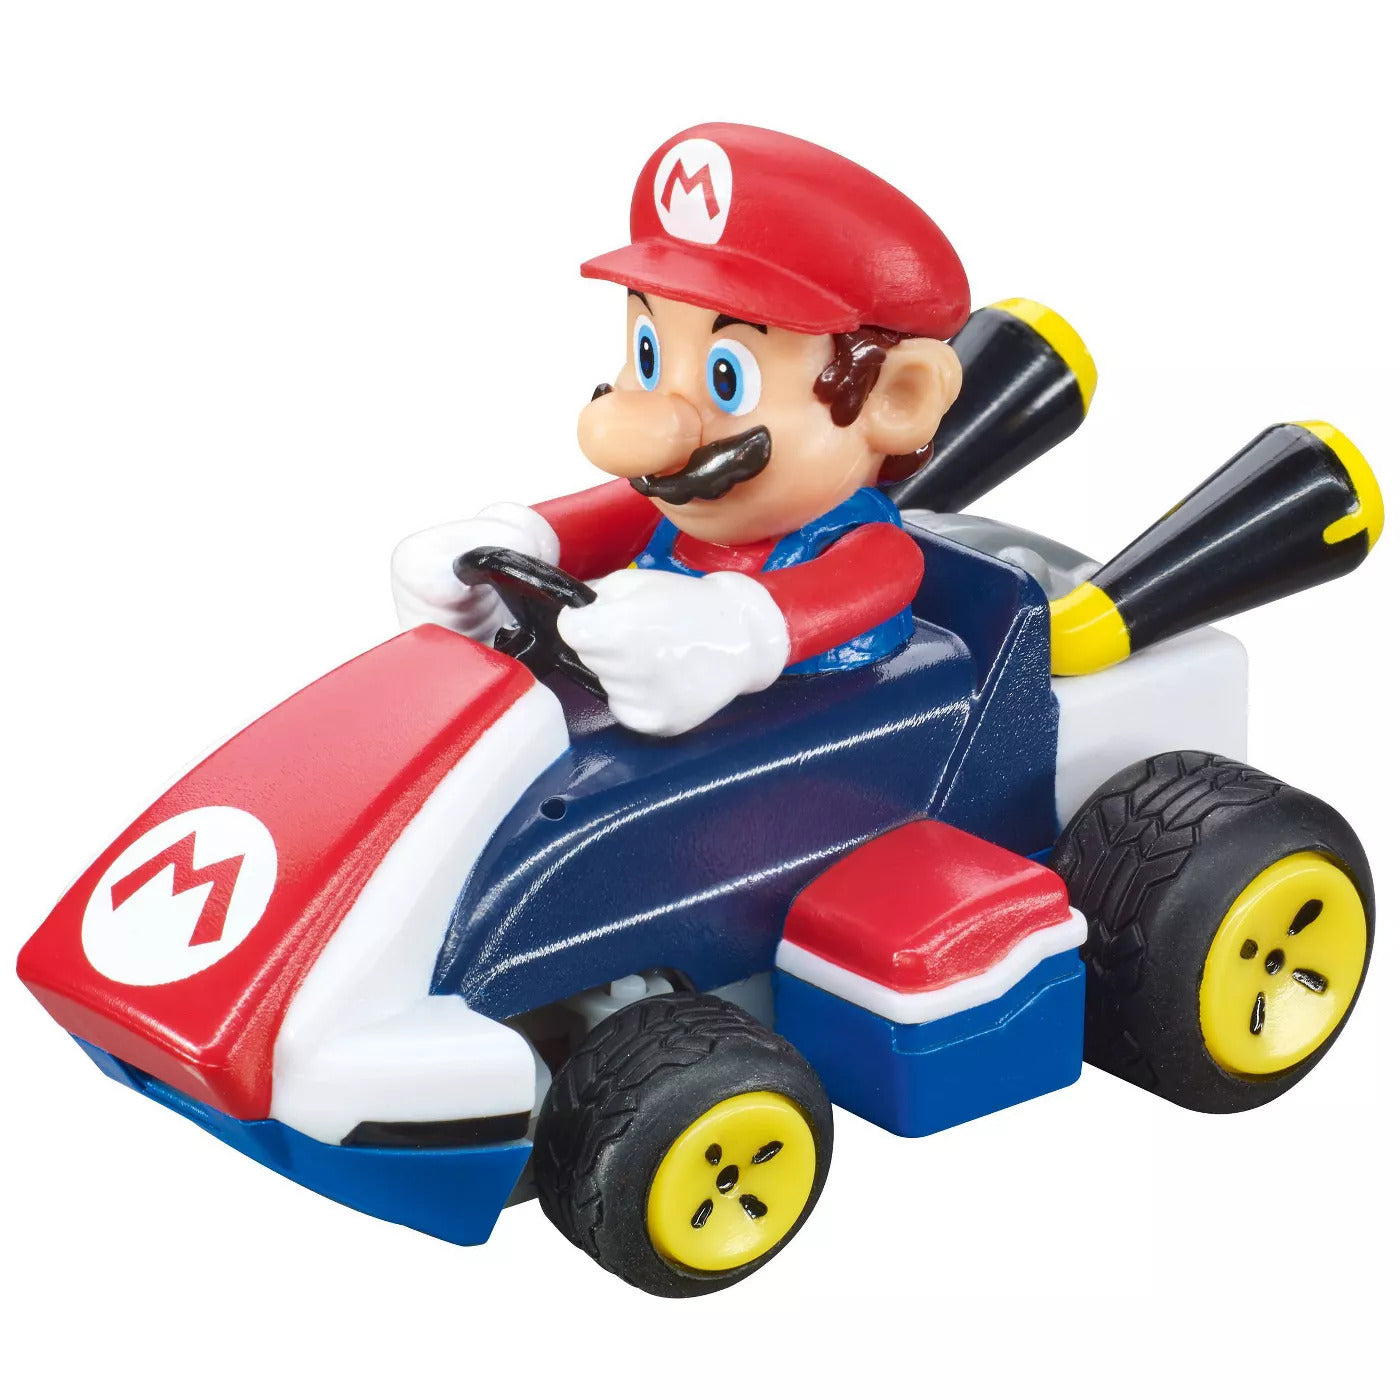 Usb Charger + battery For Carrera Mario Kart Mach 8 RC Car vehicles